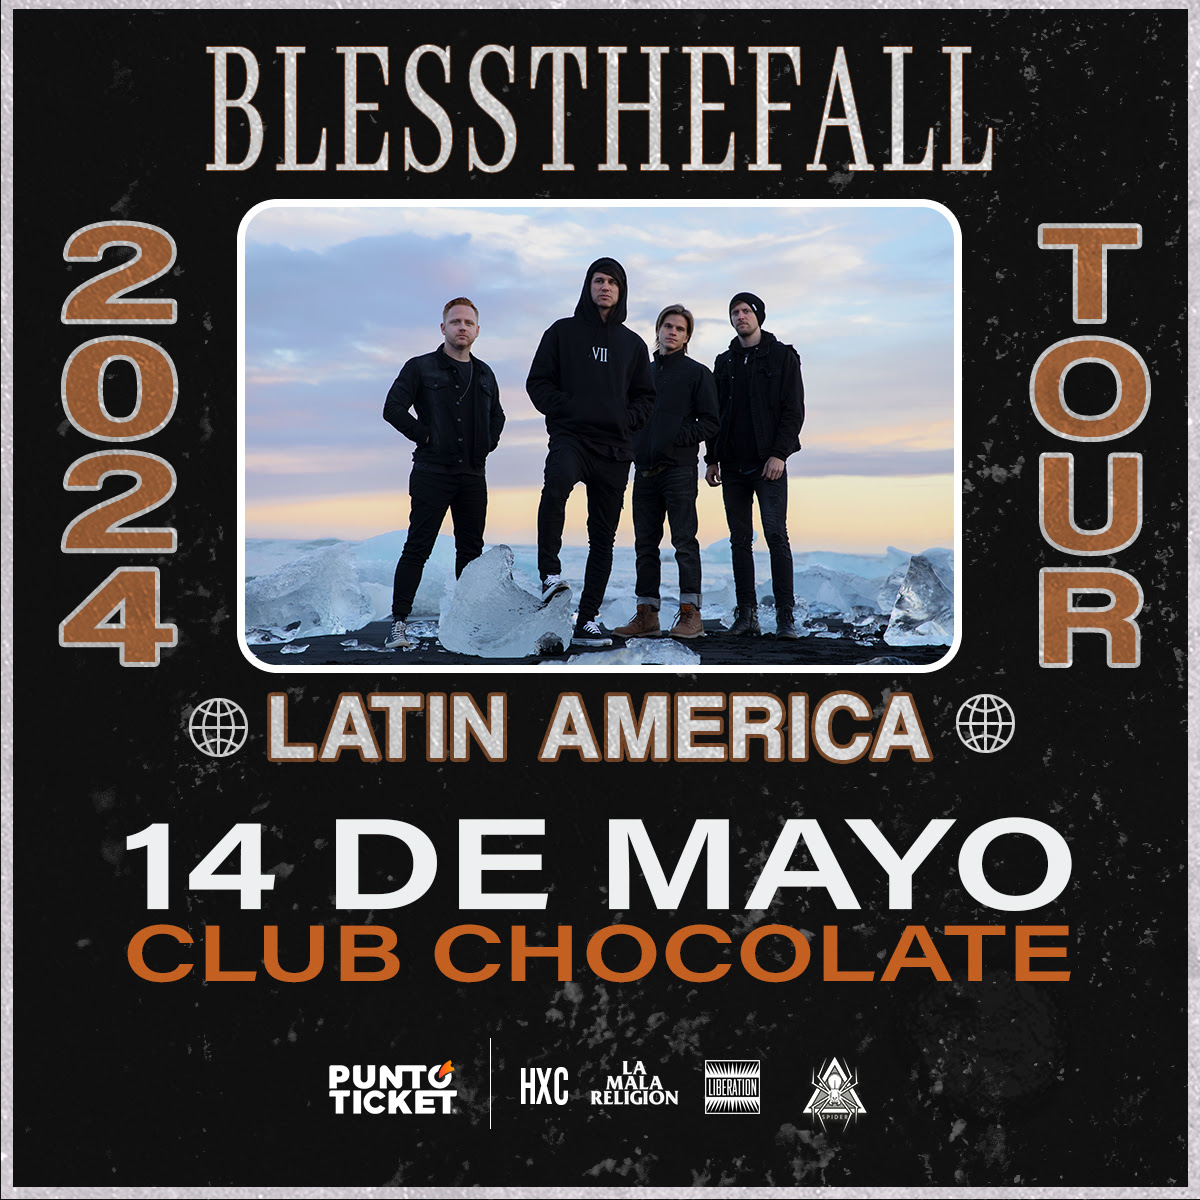 Blessthefall vuelve a Chile: 14 de mayo